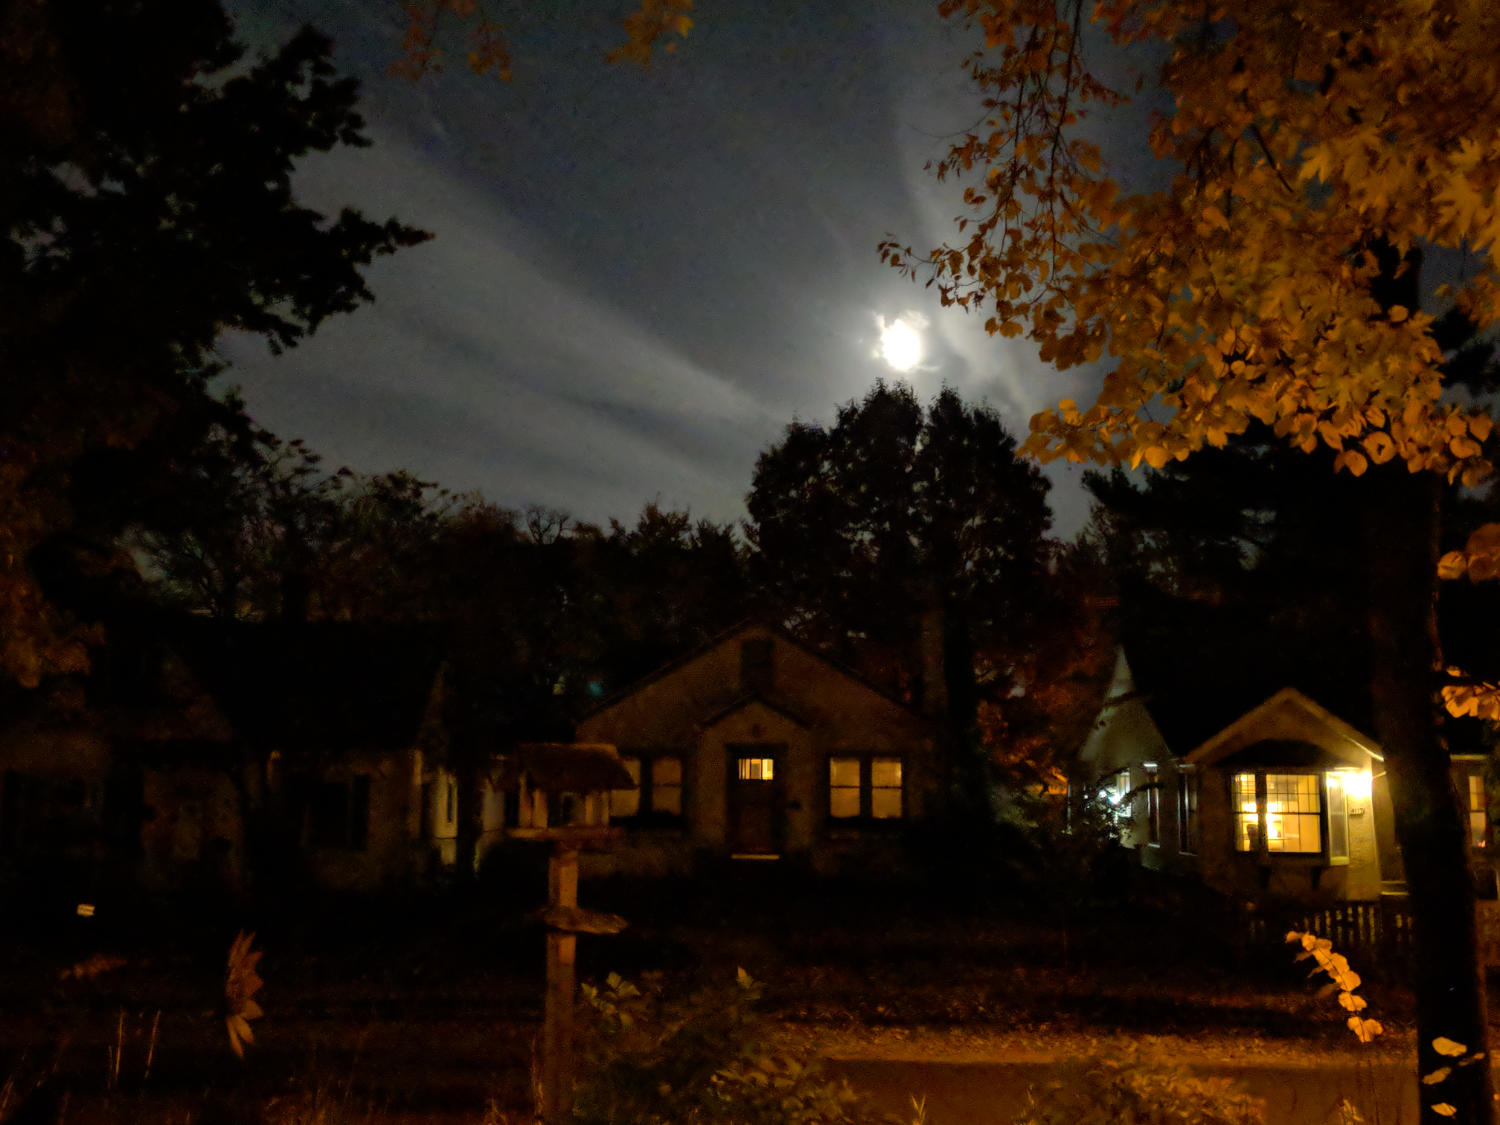 Full moon rising over dark trees and bungalow houses